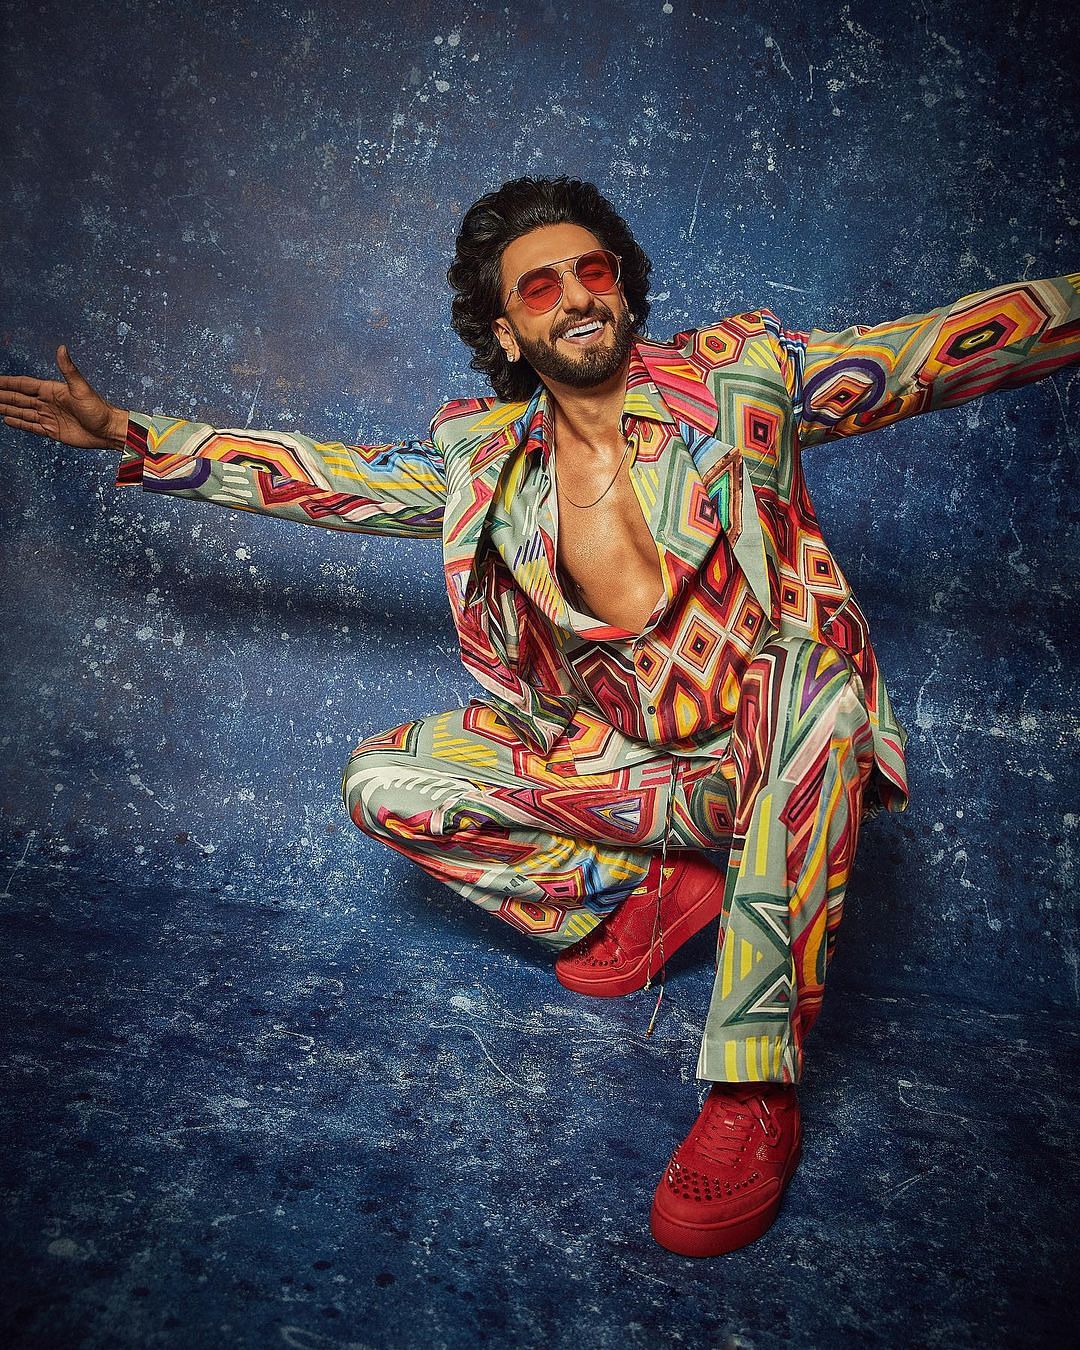 From a boyish charm to an almost sensual gaze at masculinity, Ranveer Singh is more than he seems.